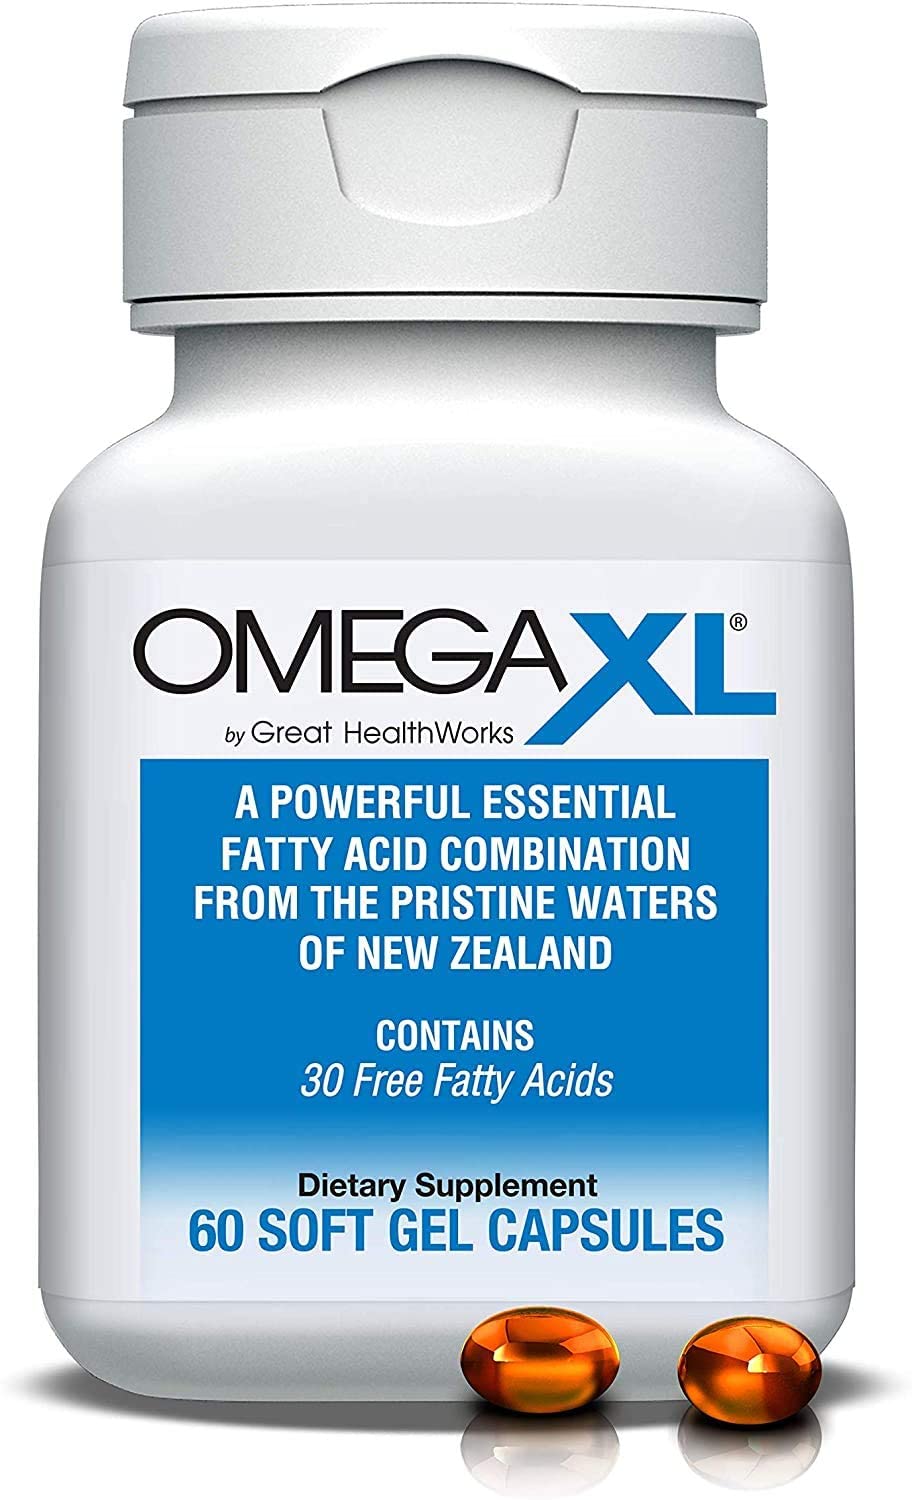 Omega XL Reviews, benefits and side effects